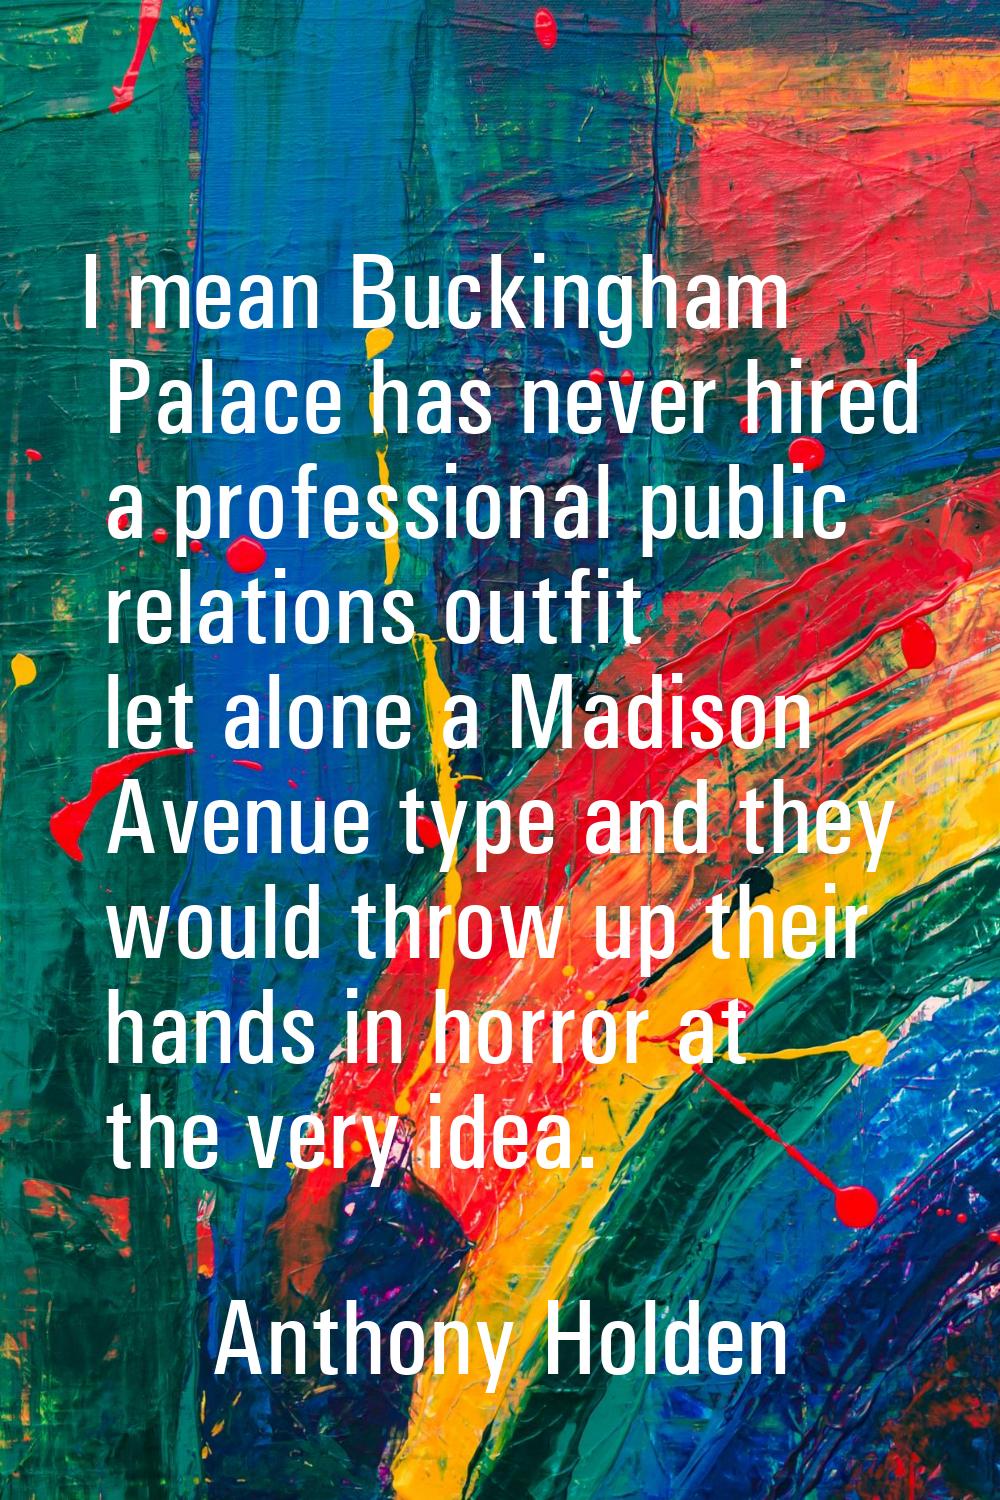 I mean Buckingham Palace has never hired a professional public relations outfit let alone a Madison